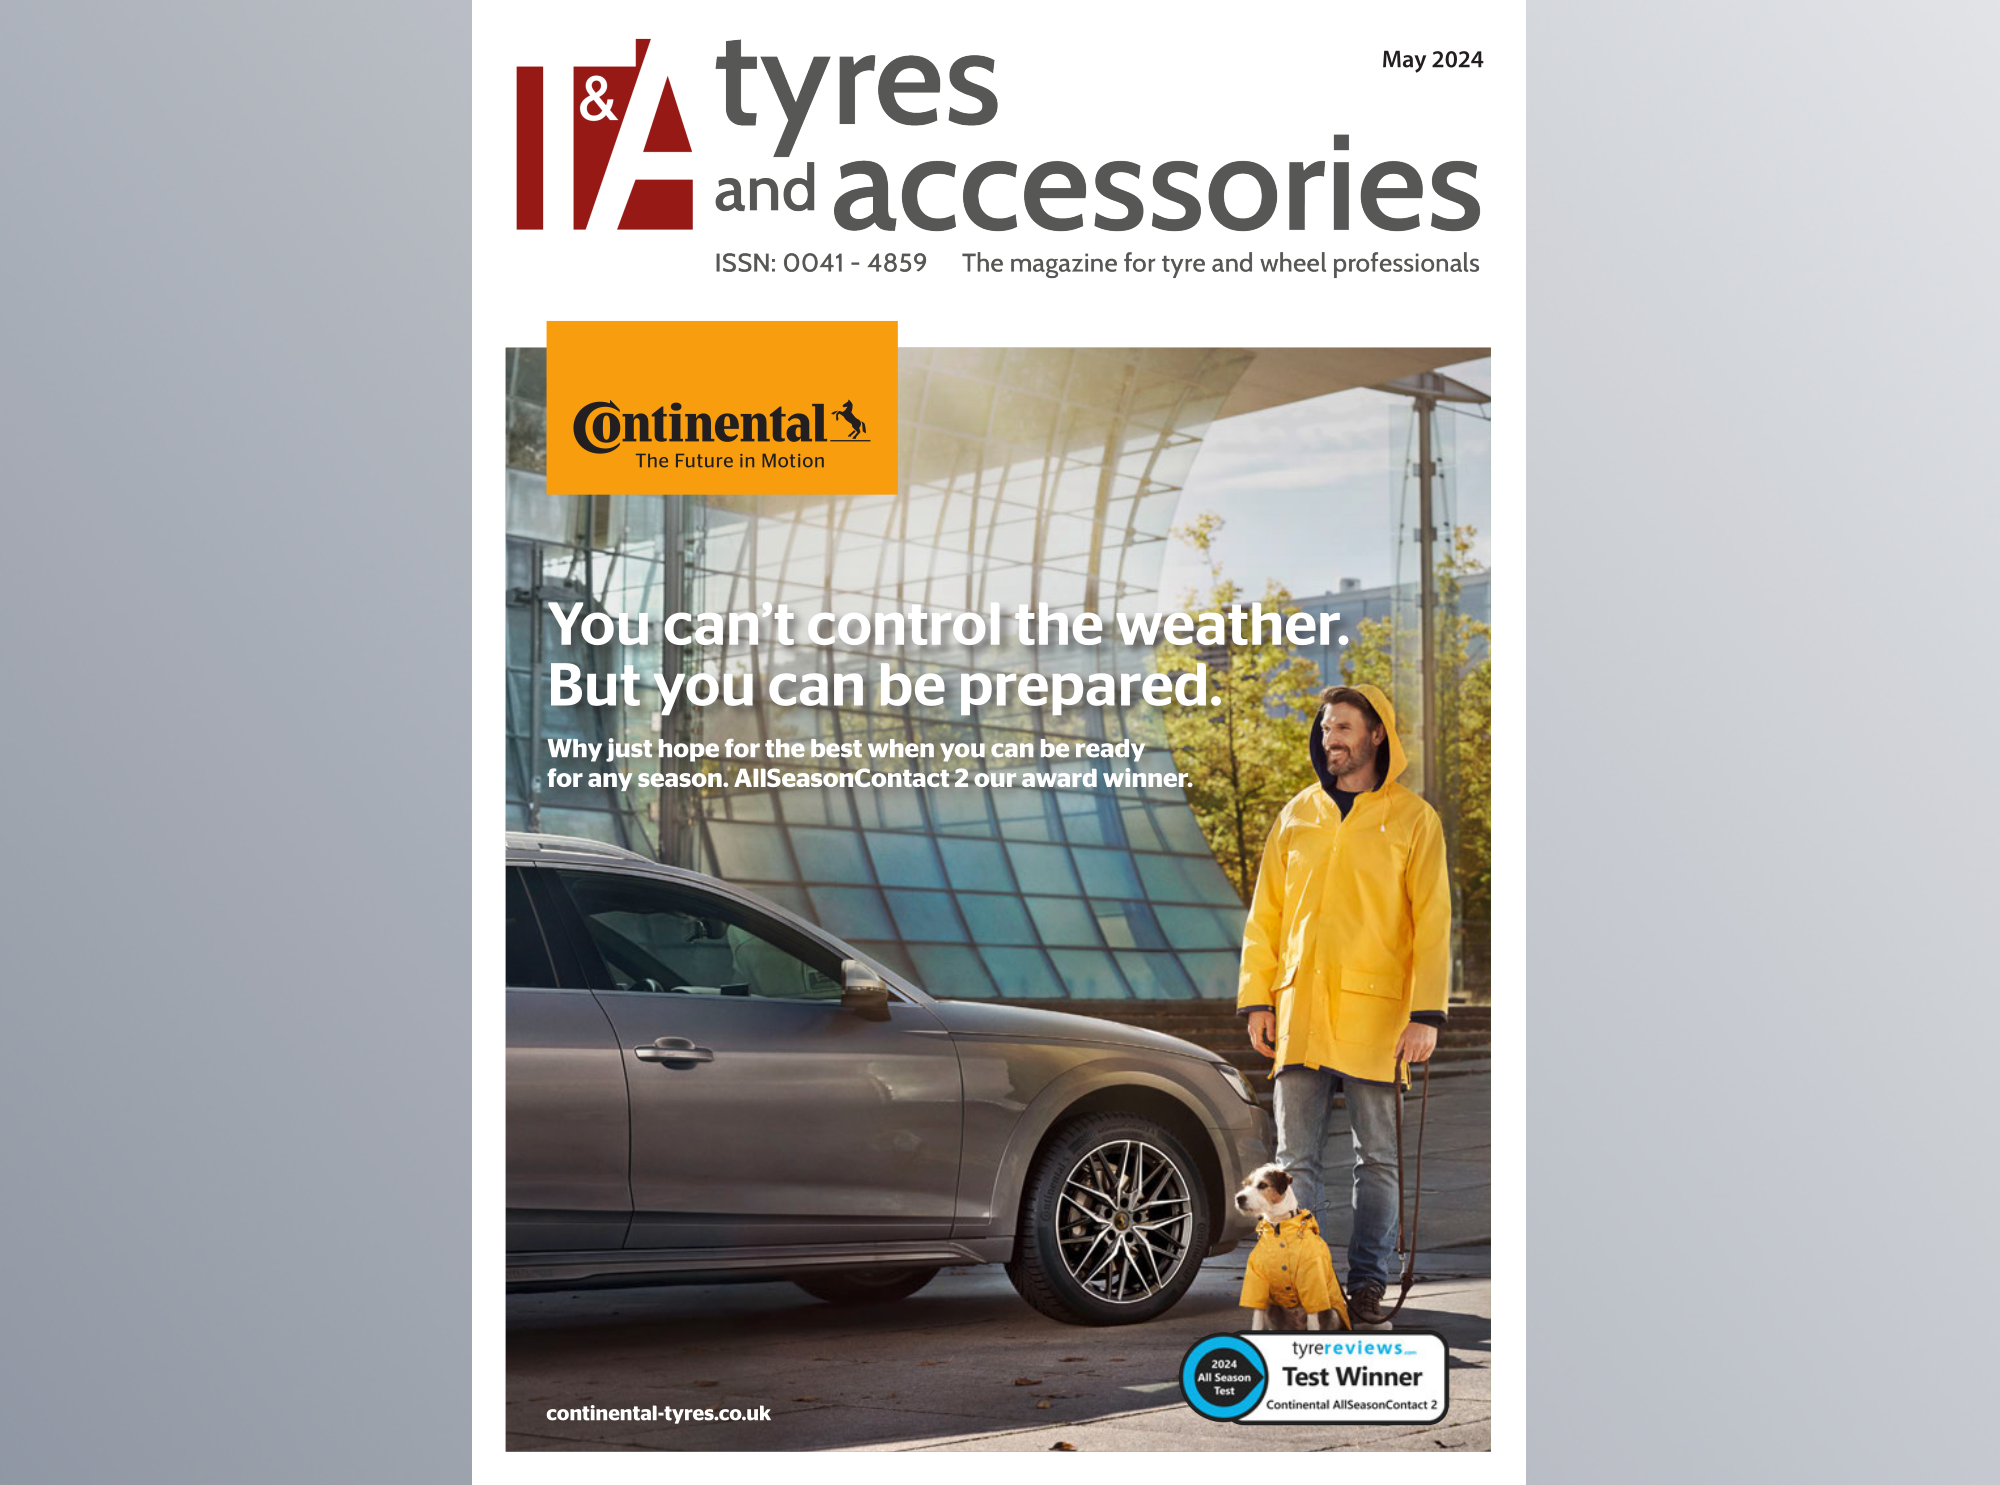 Read and download Tyres & Accessories Magazine May 2024 now